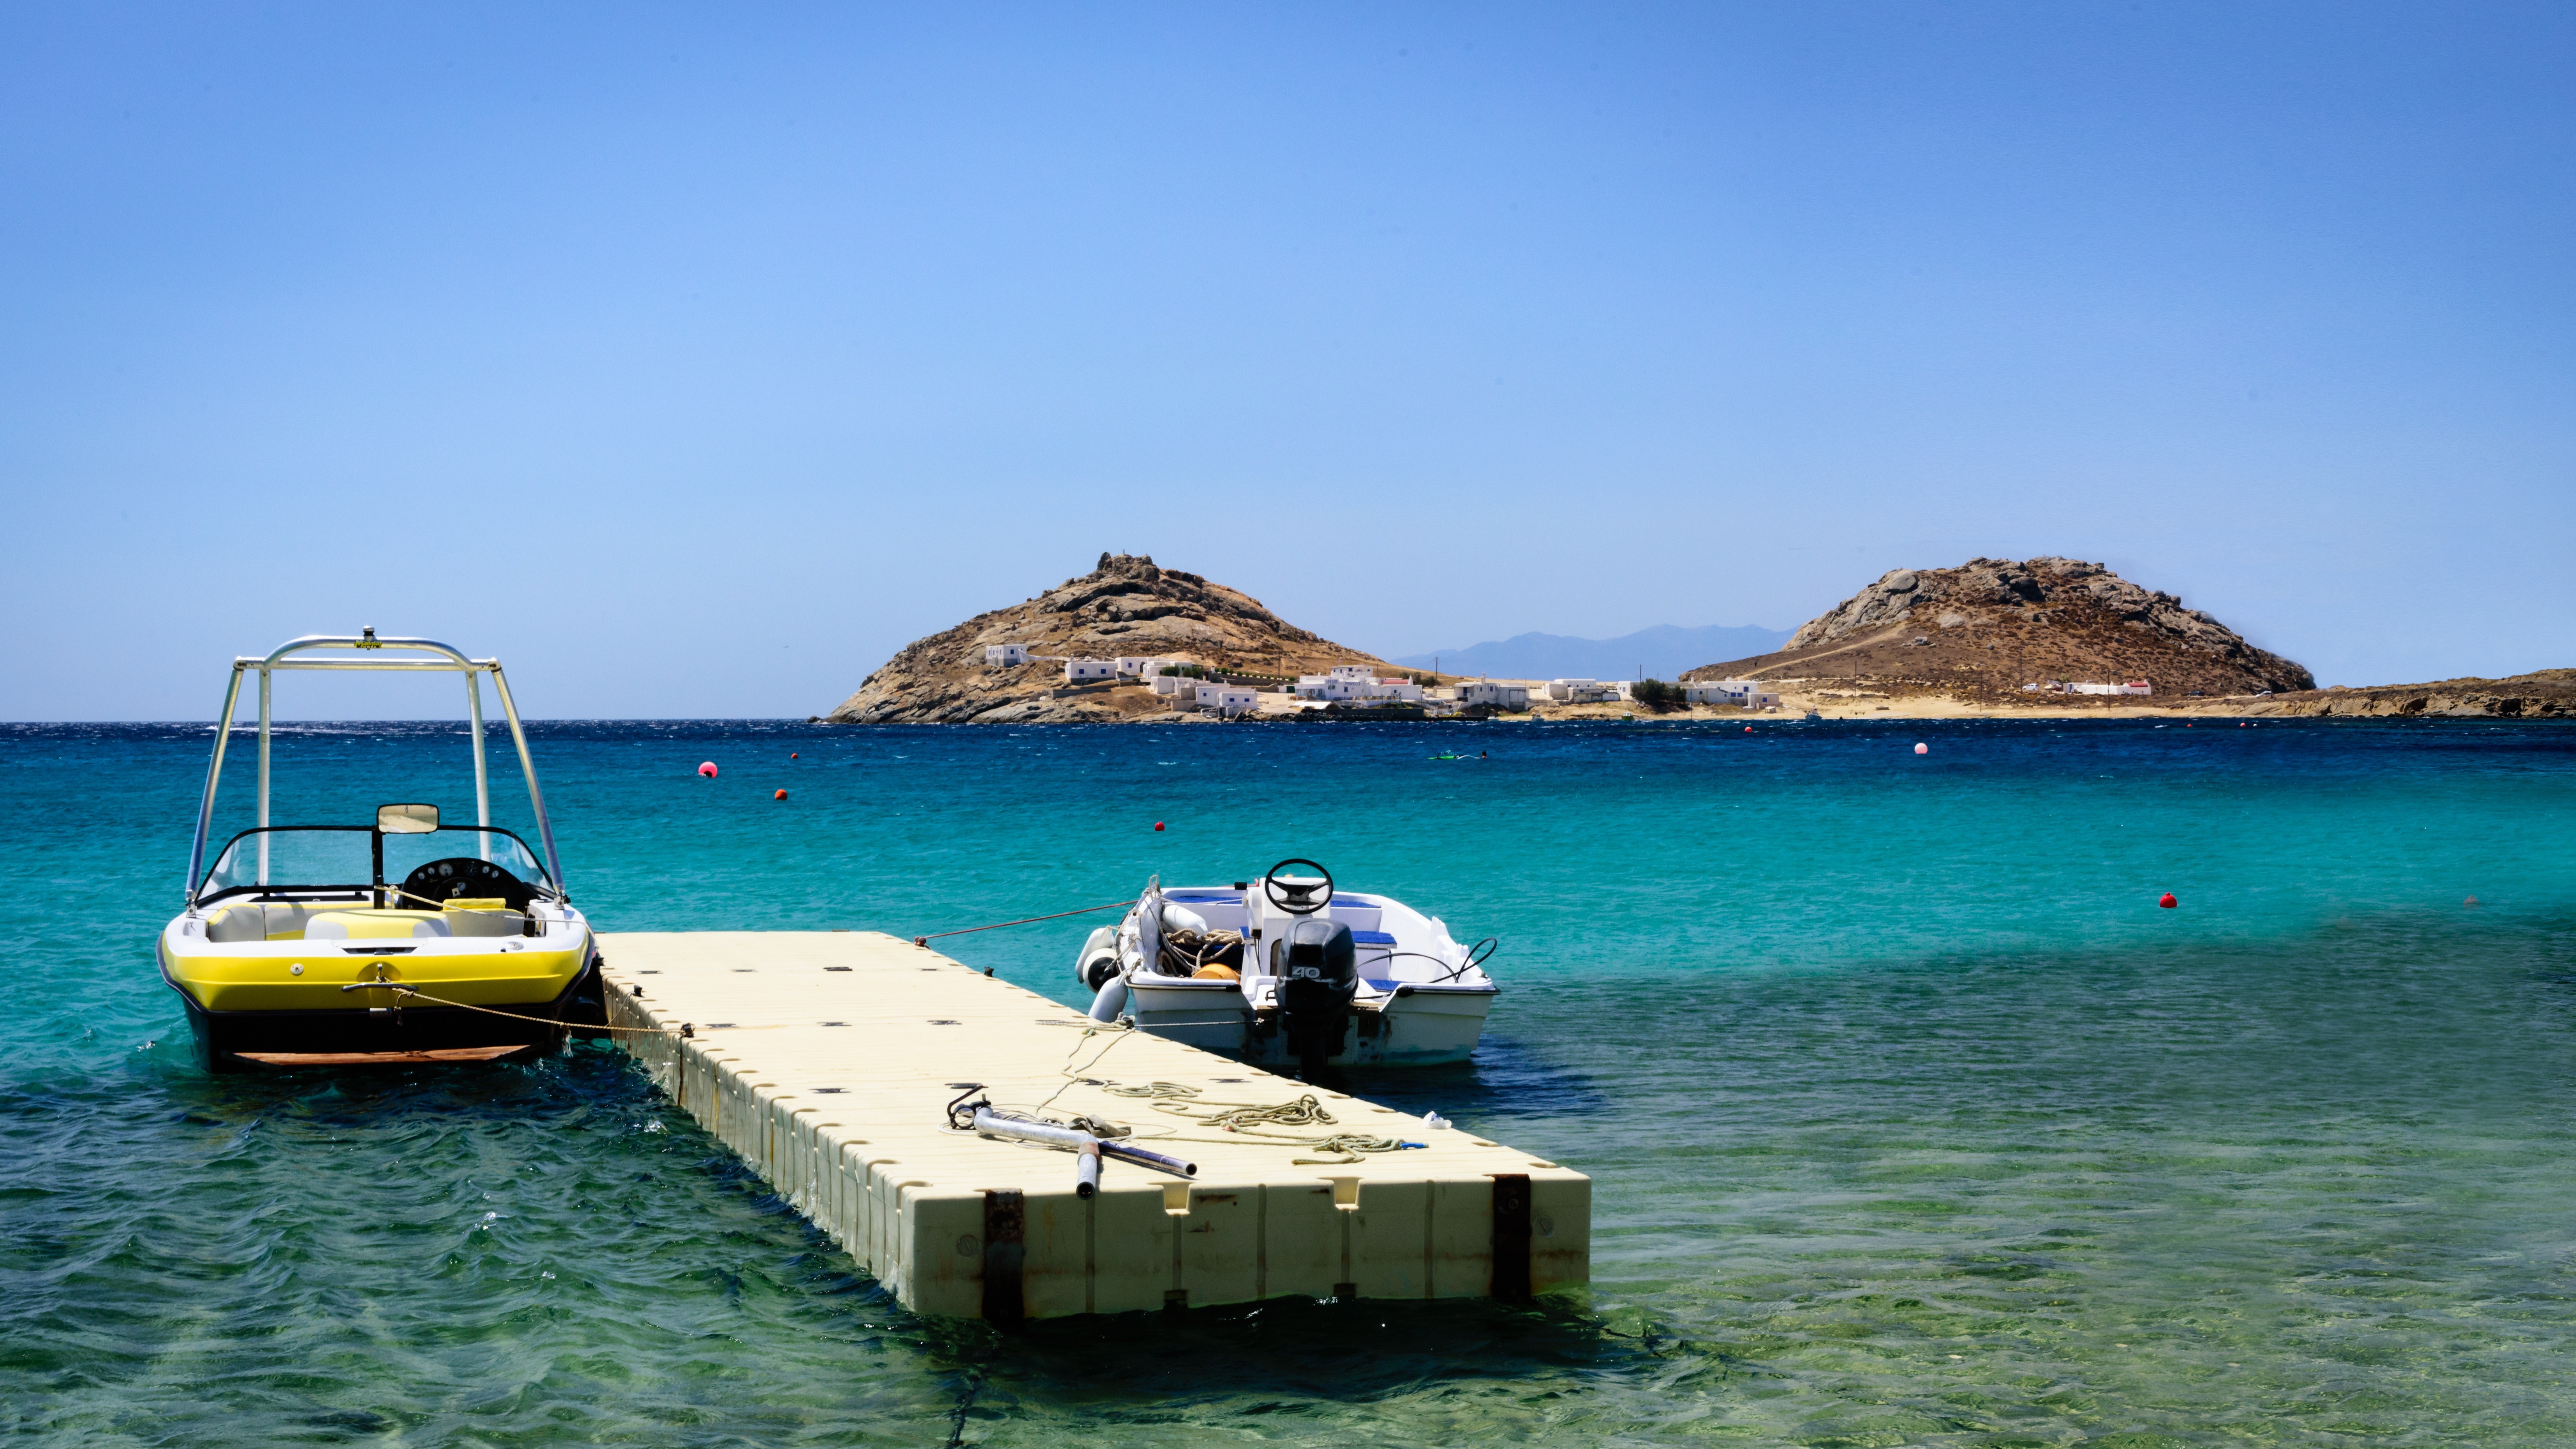 White Pedal Boat on Sea during Daytime, Aegean, Relax, Water, Vehicle, HQ Photo